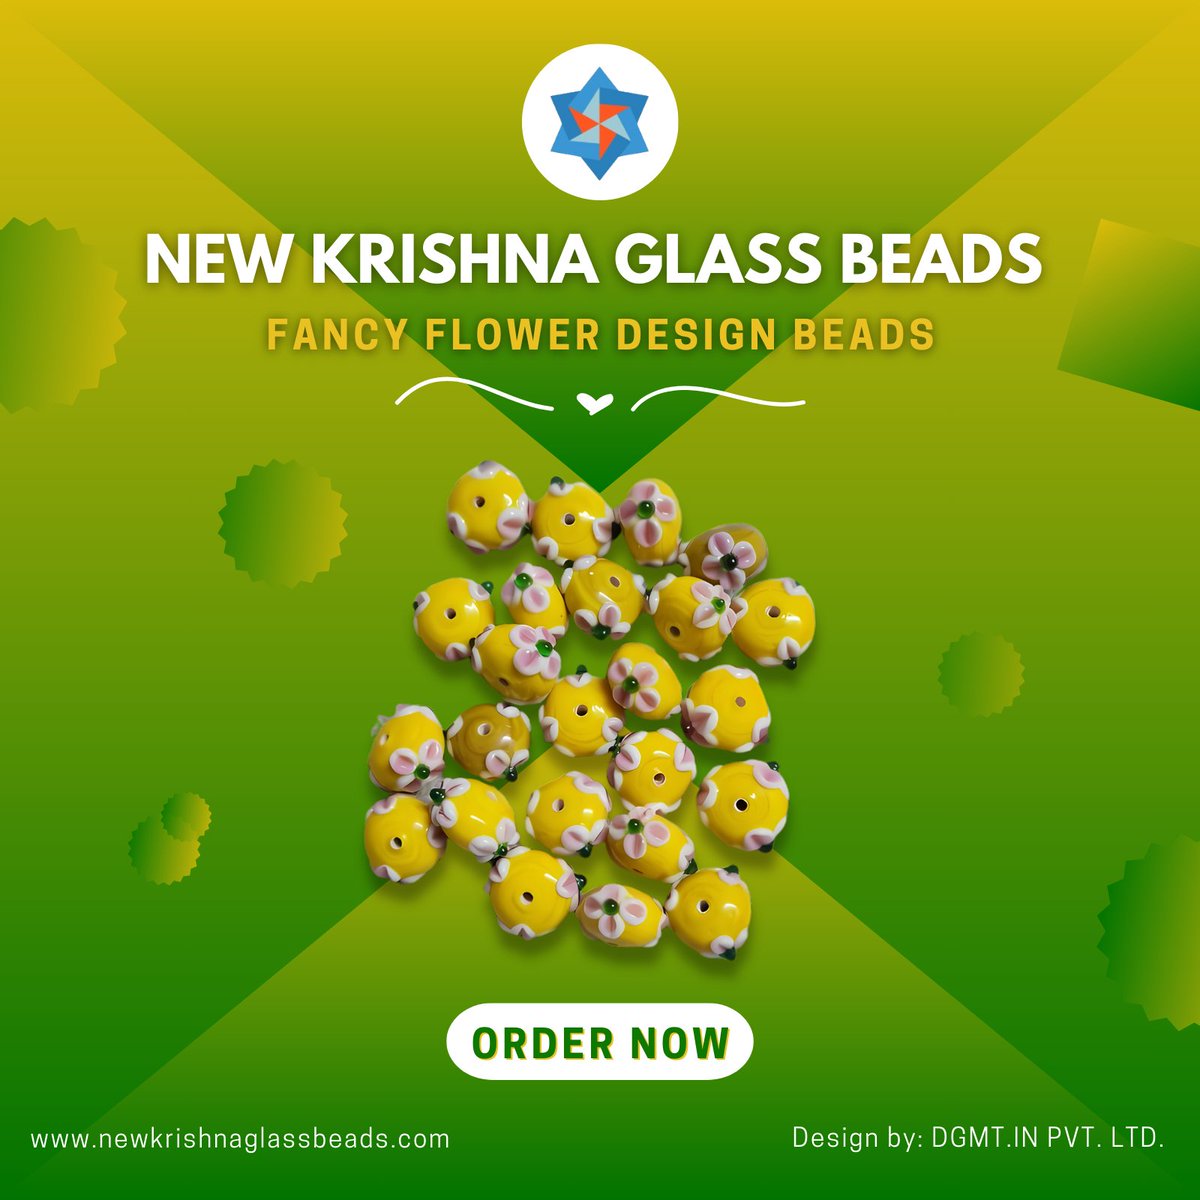 Enhance your jewelry creations with Krishna's latest Fancy Flower Design Glass Beads! 🌸✨Elevate your designs with these stunning additions. Shop now to add a touch of elegance to your collection!

#KrishnaGlassBeads #FancyFlowerDesign #JewelryDesigns #KrishnaGlassBeads